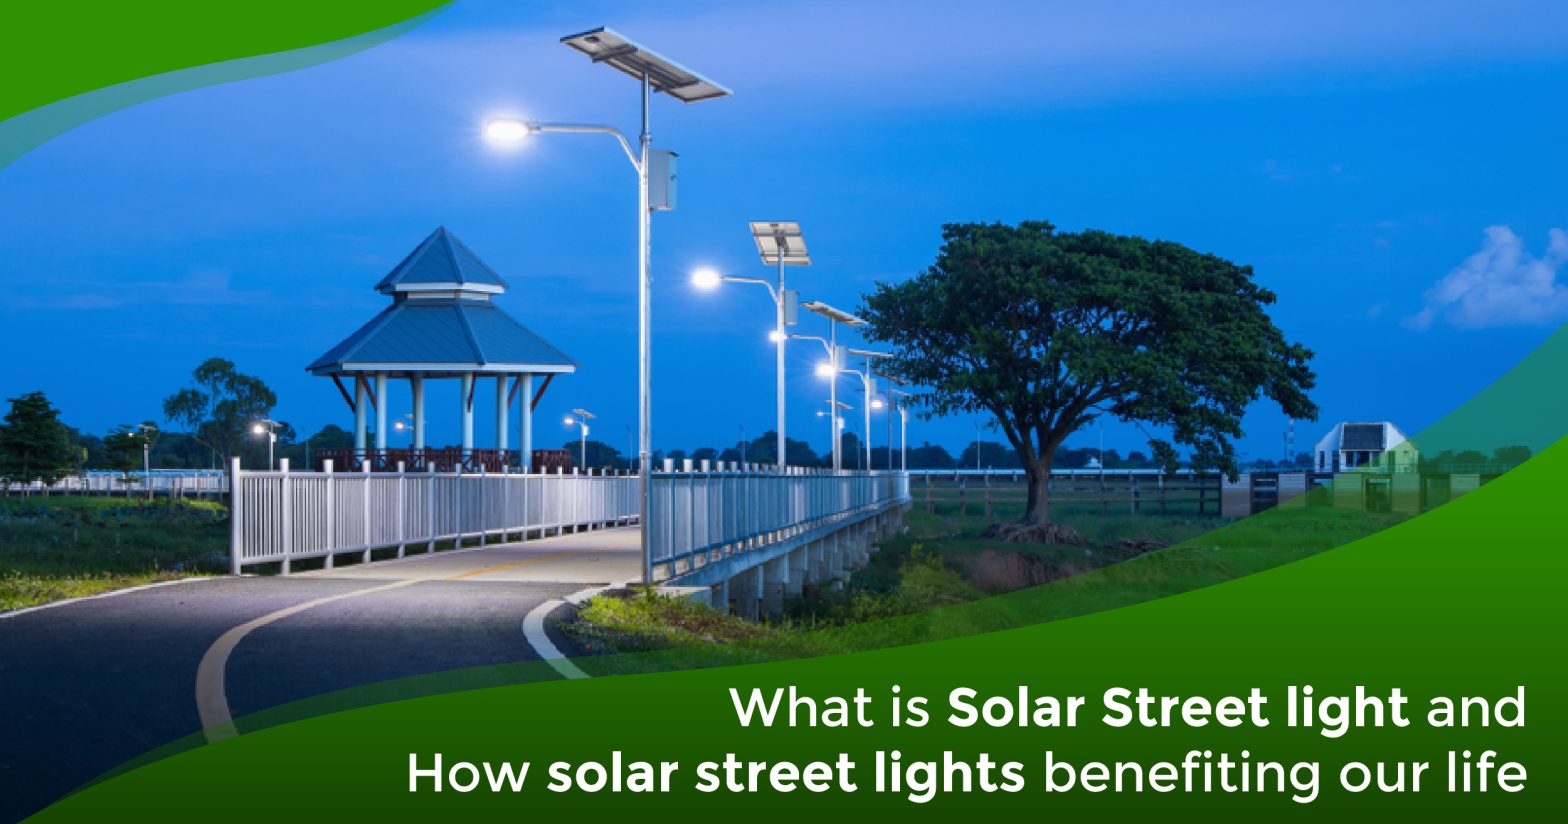 What is Solar Street light and how solar streetlights benefiting our life